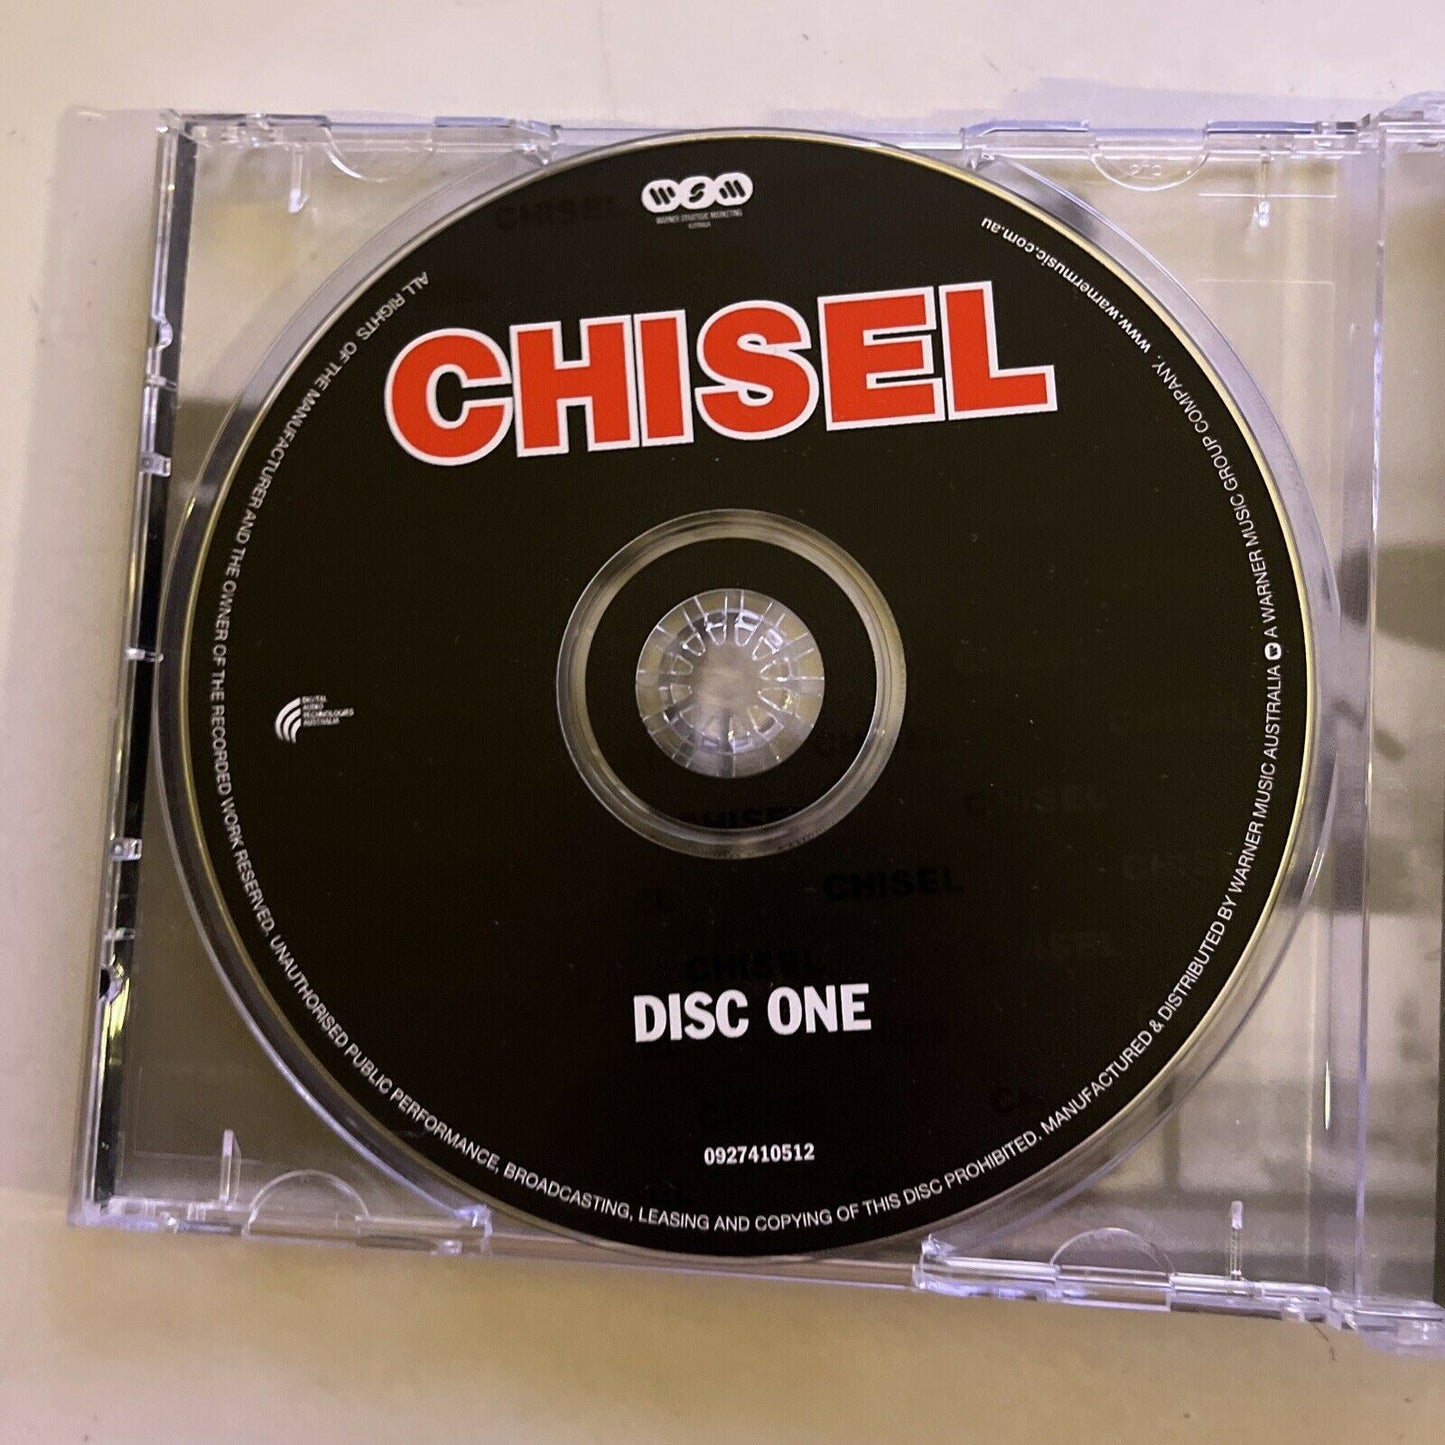 Cold Chisel - Chisel (Greatest Hits) - CD 2-Disc Album 2001